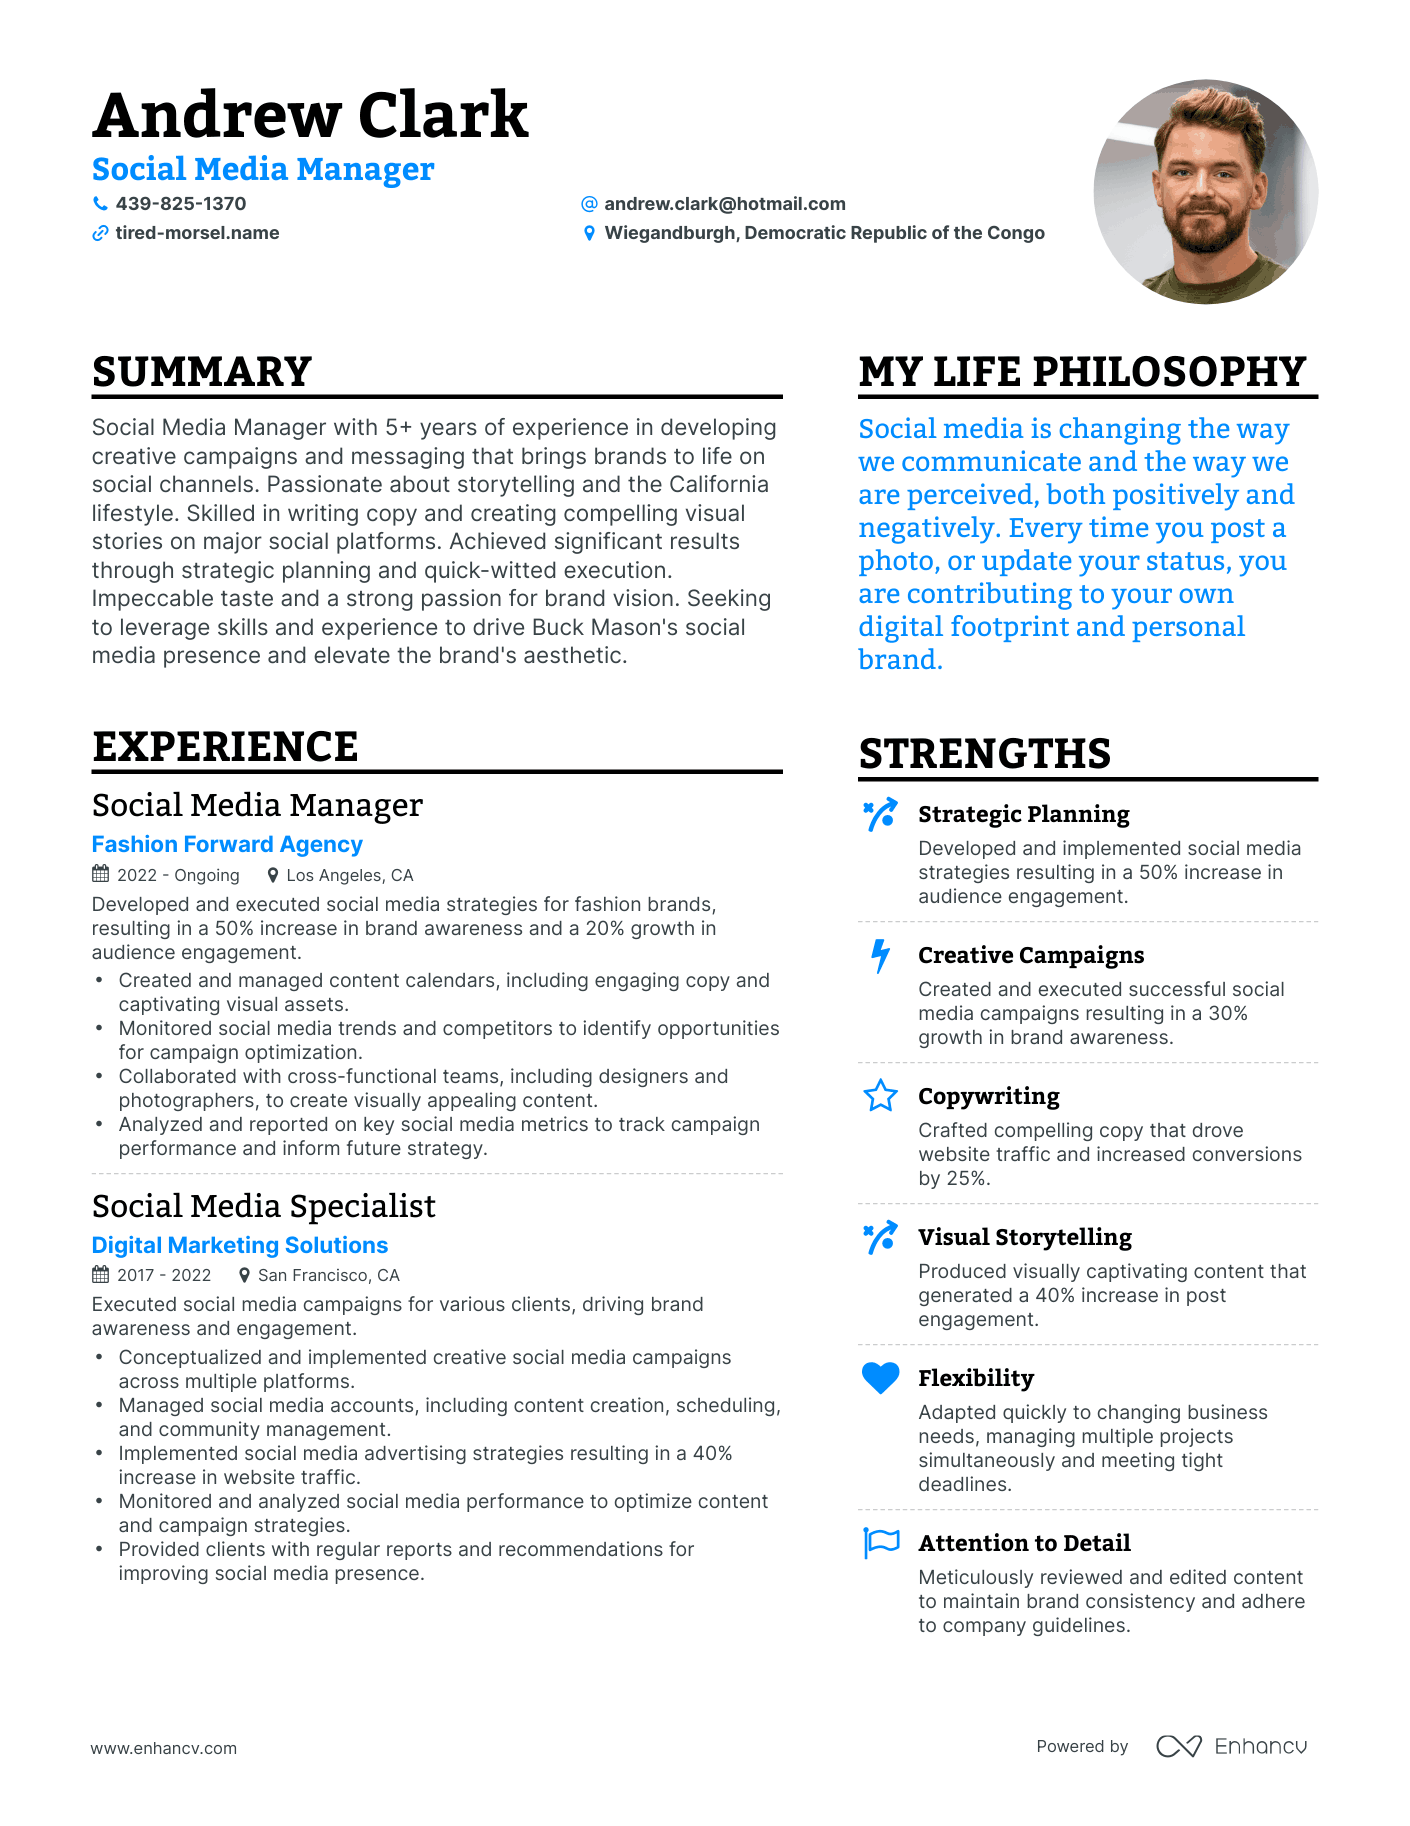 Social Media Manager resume example